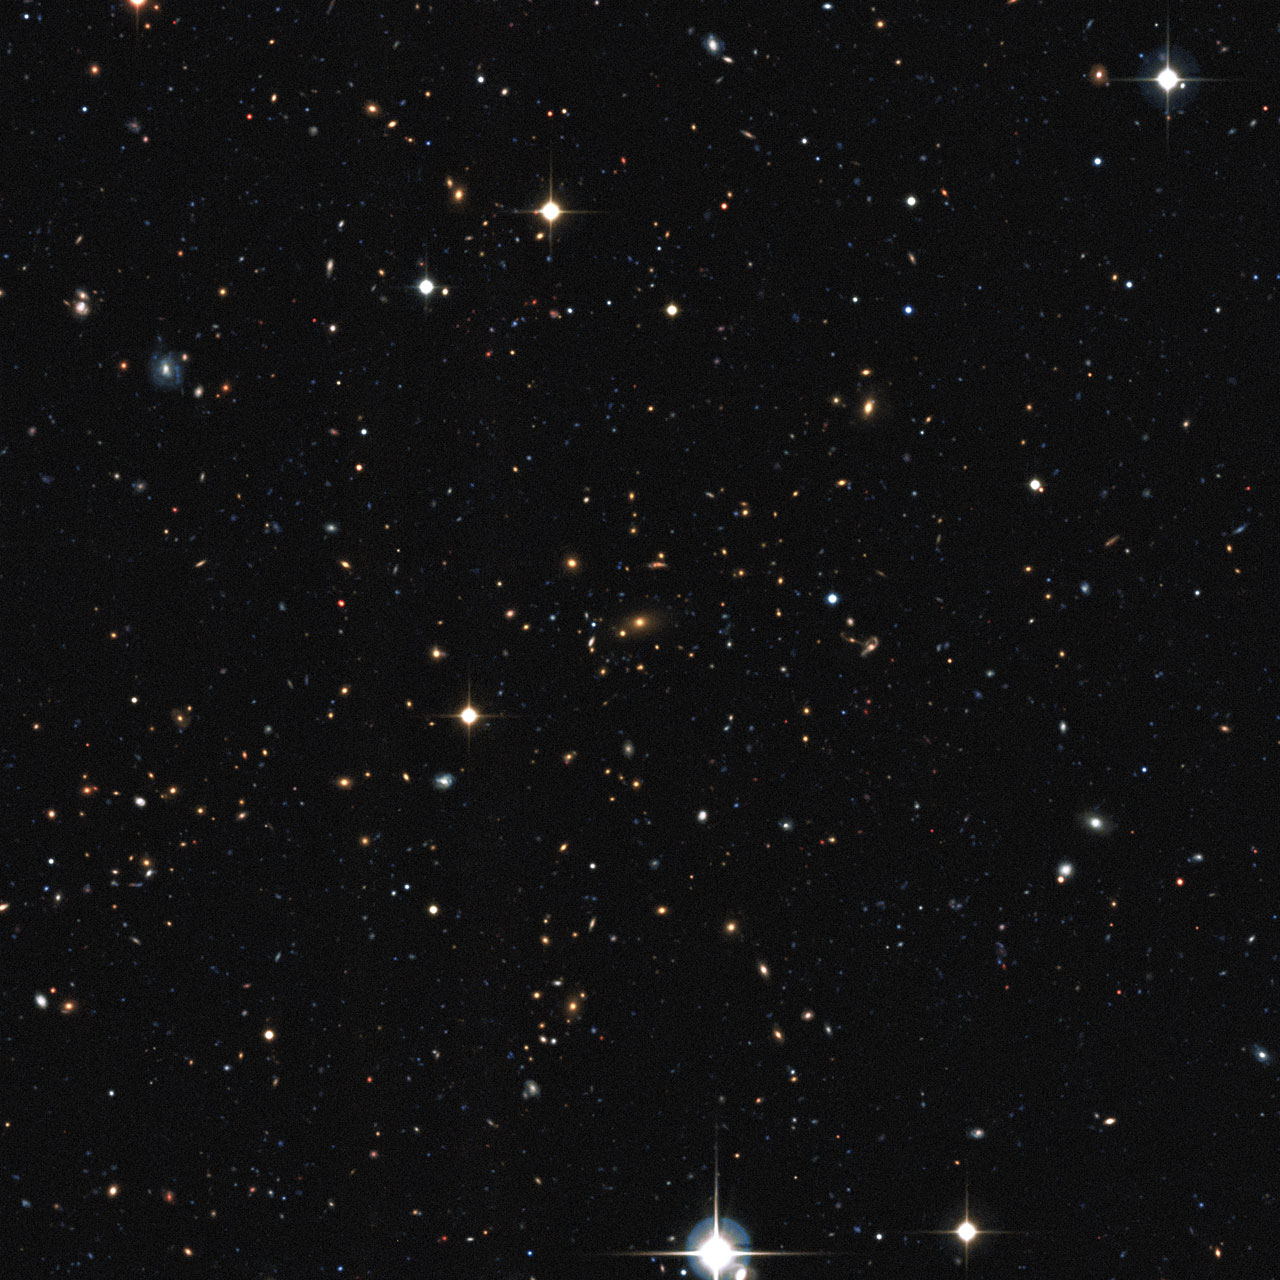 Visible light view of a distant galaxy cluster discovered in the